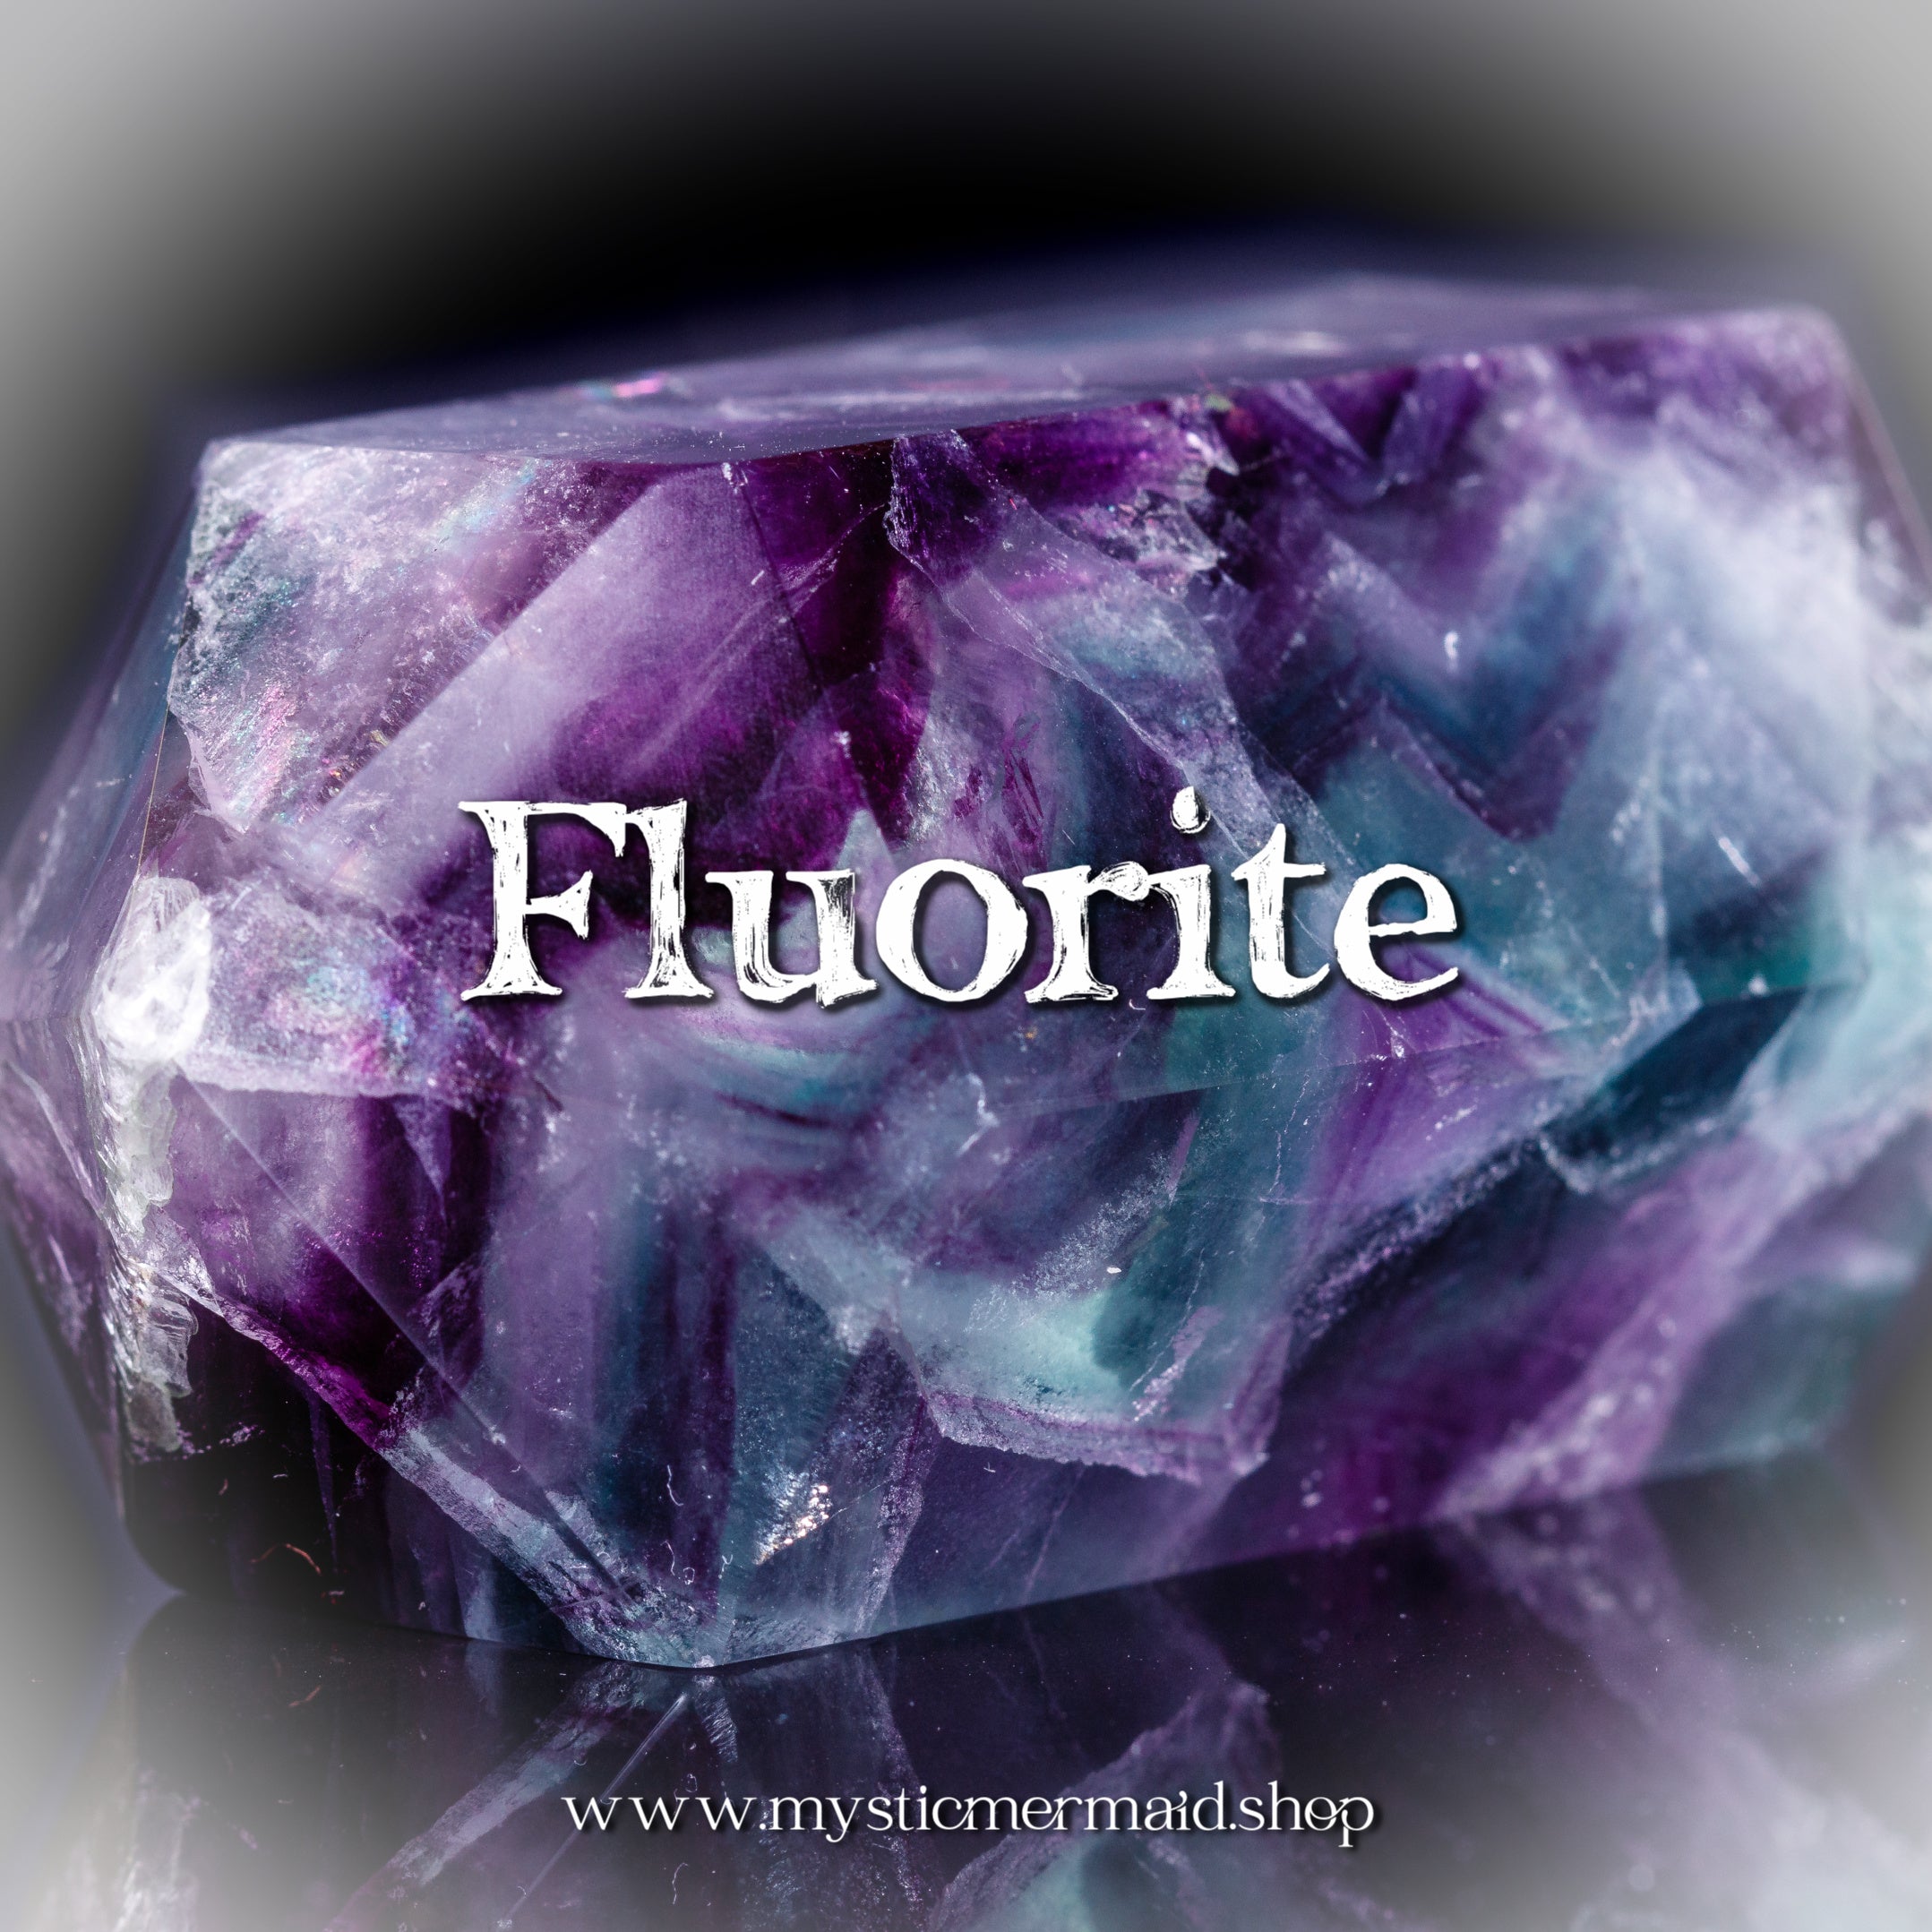 Fluorite Crystals available from Mystic Mermaid Metaphysical Description